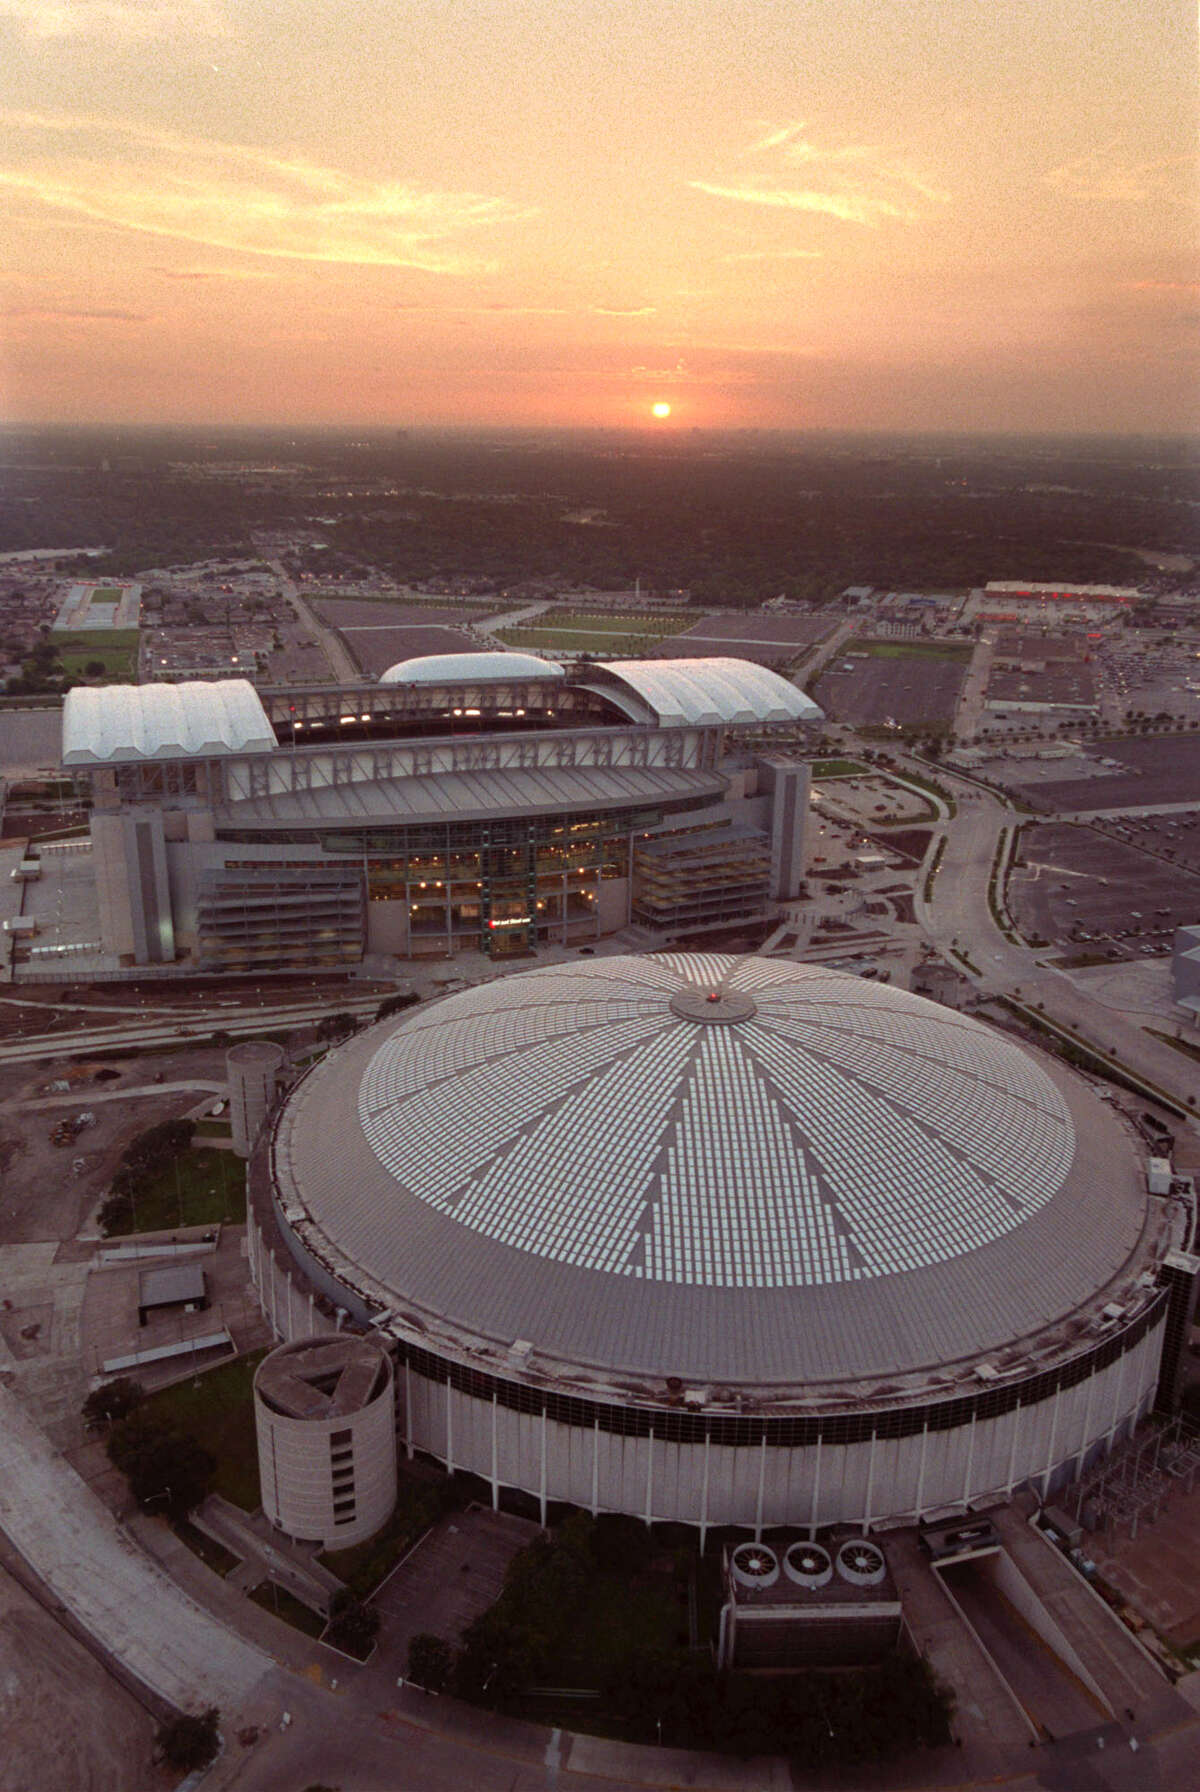 Harris County officials have been pondering the fate of the Astrodome for years, and they appear to be no closer to a proposal to present to voters.